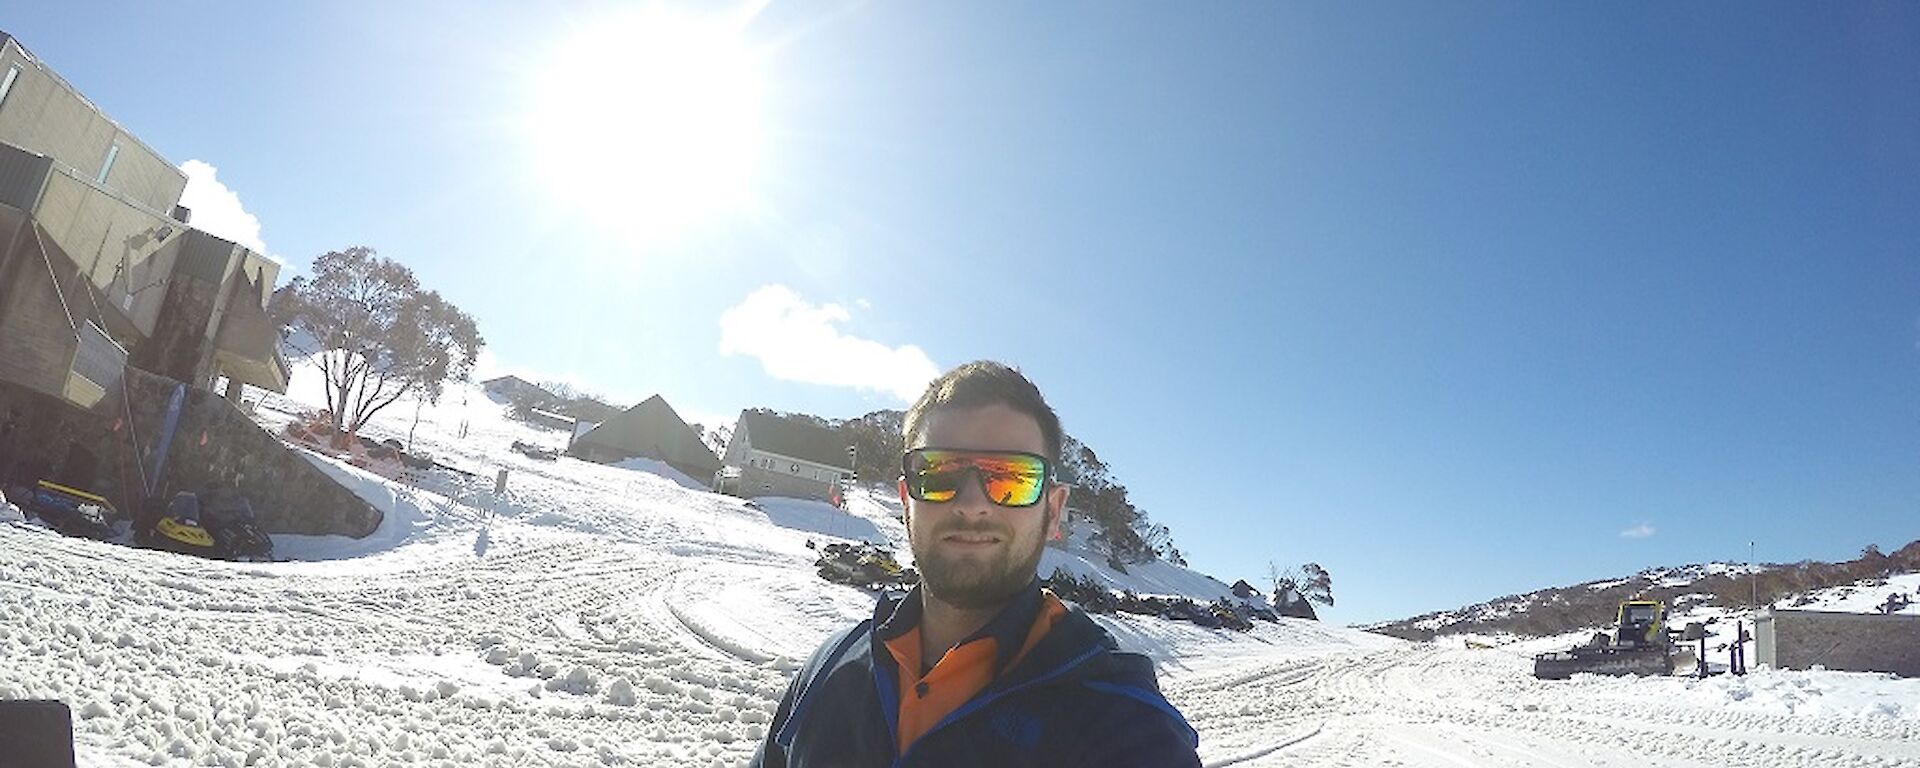 Nate at the Perisher ski fields for the groomer familiarisation course